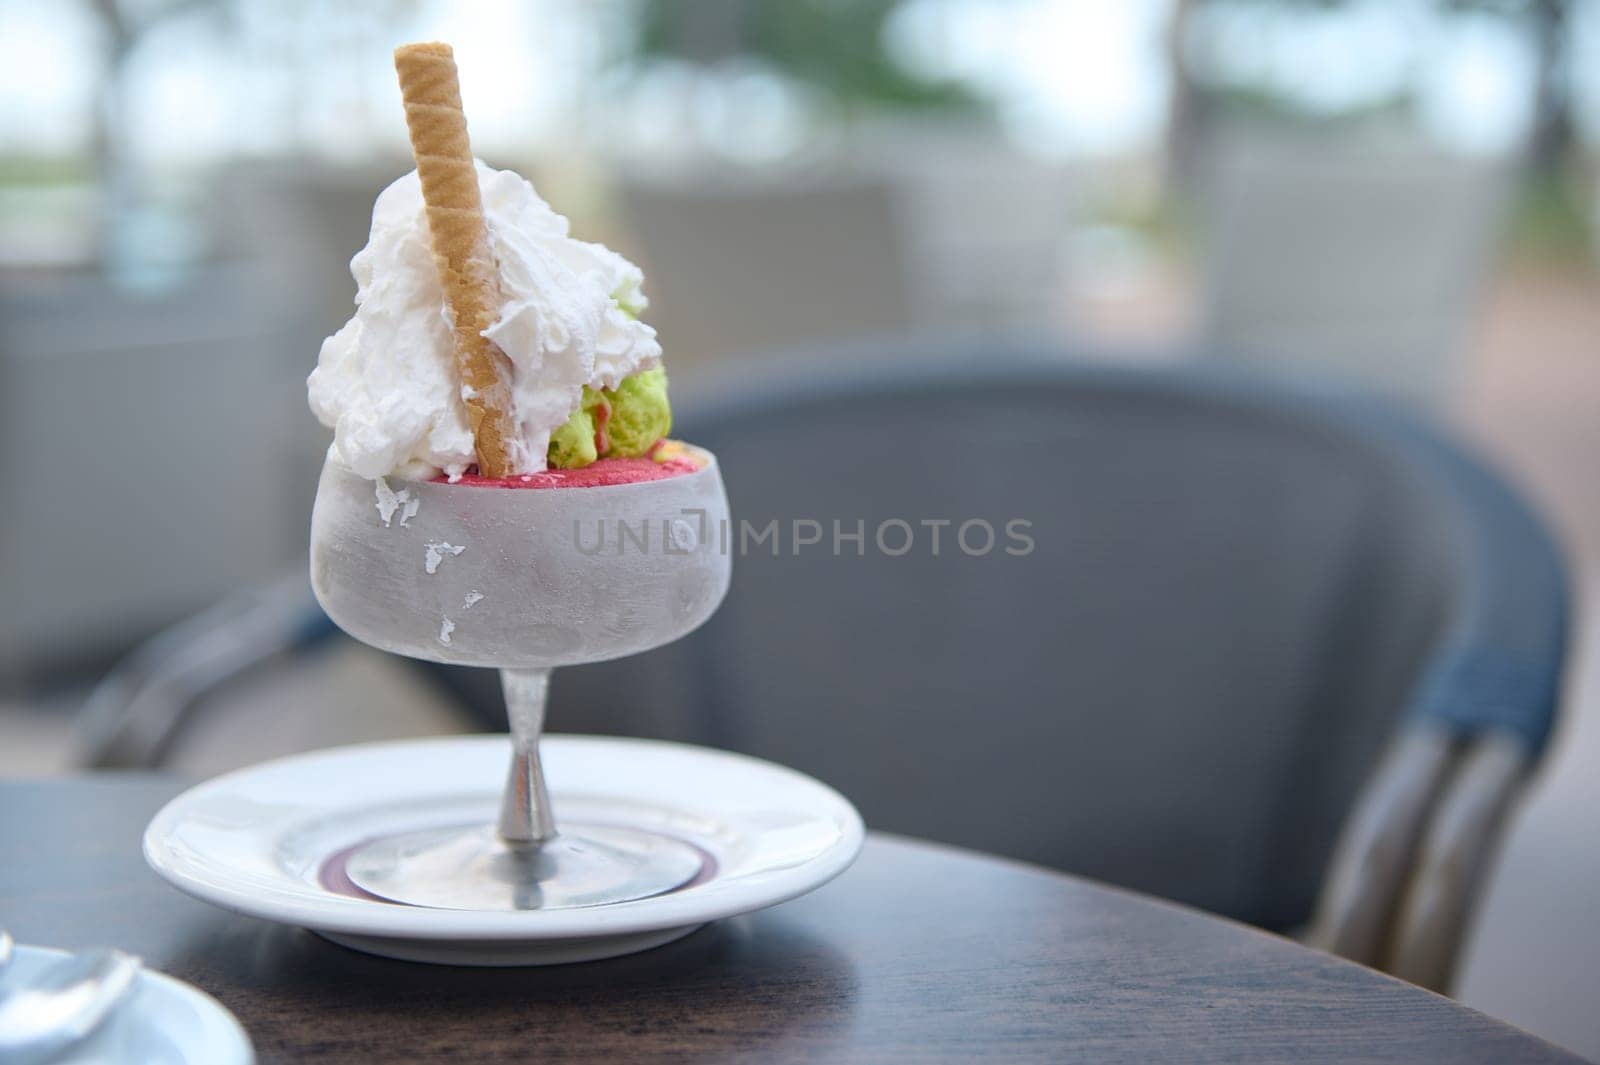 Delicious ice cream sundae with whipped cream and wafer stick by artgf